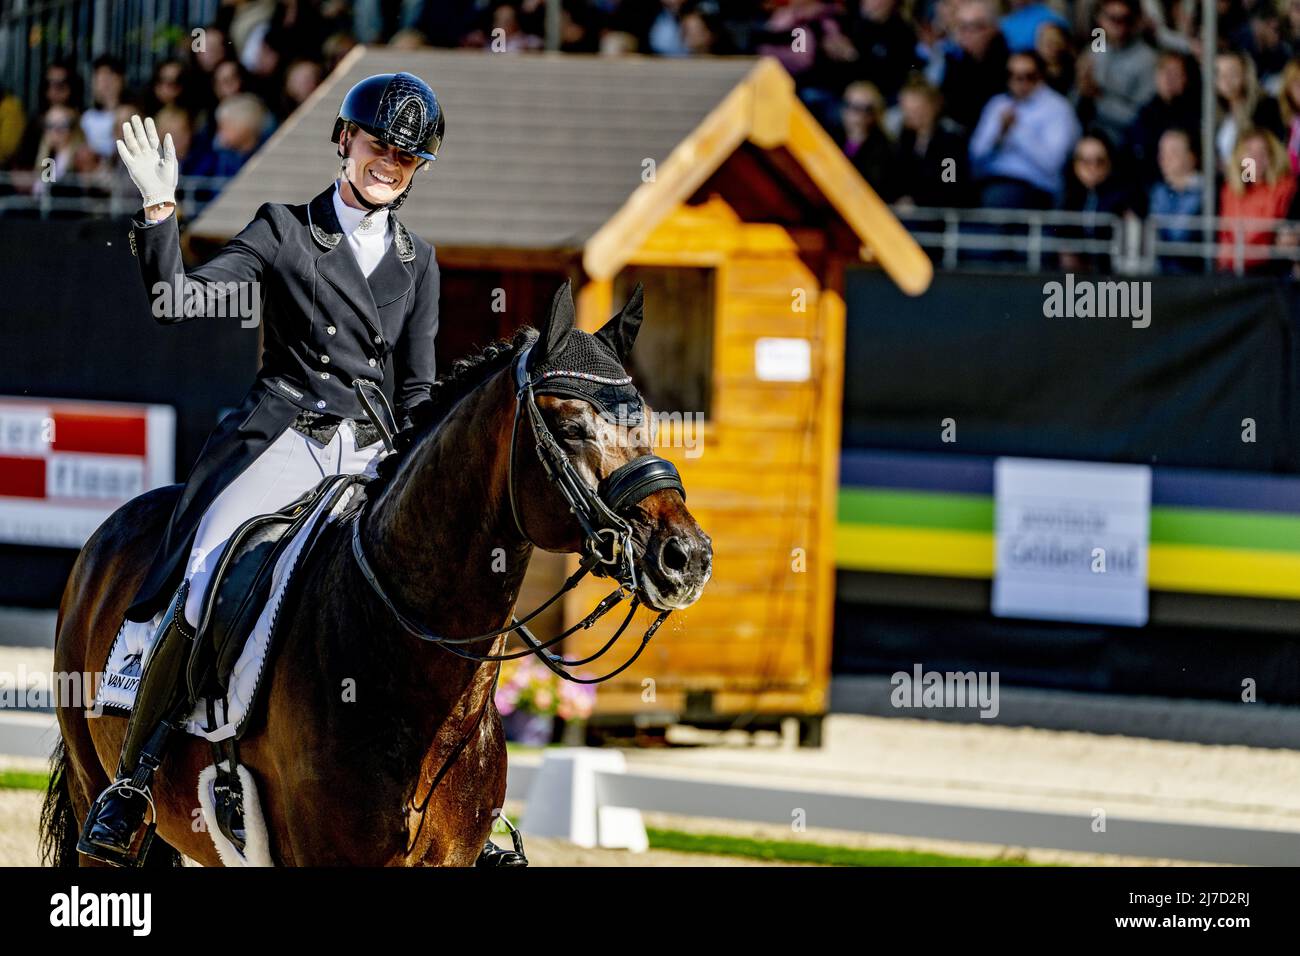 Ermelo, The Netherlands, 2022-05-08 17:02:08 ERMELO - Dinja van Liere and Hermès became champion during the Dutch dressage championship. ANP ROBIN UTRECHT netherlands out - belgium out Stock Photo